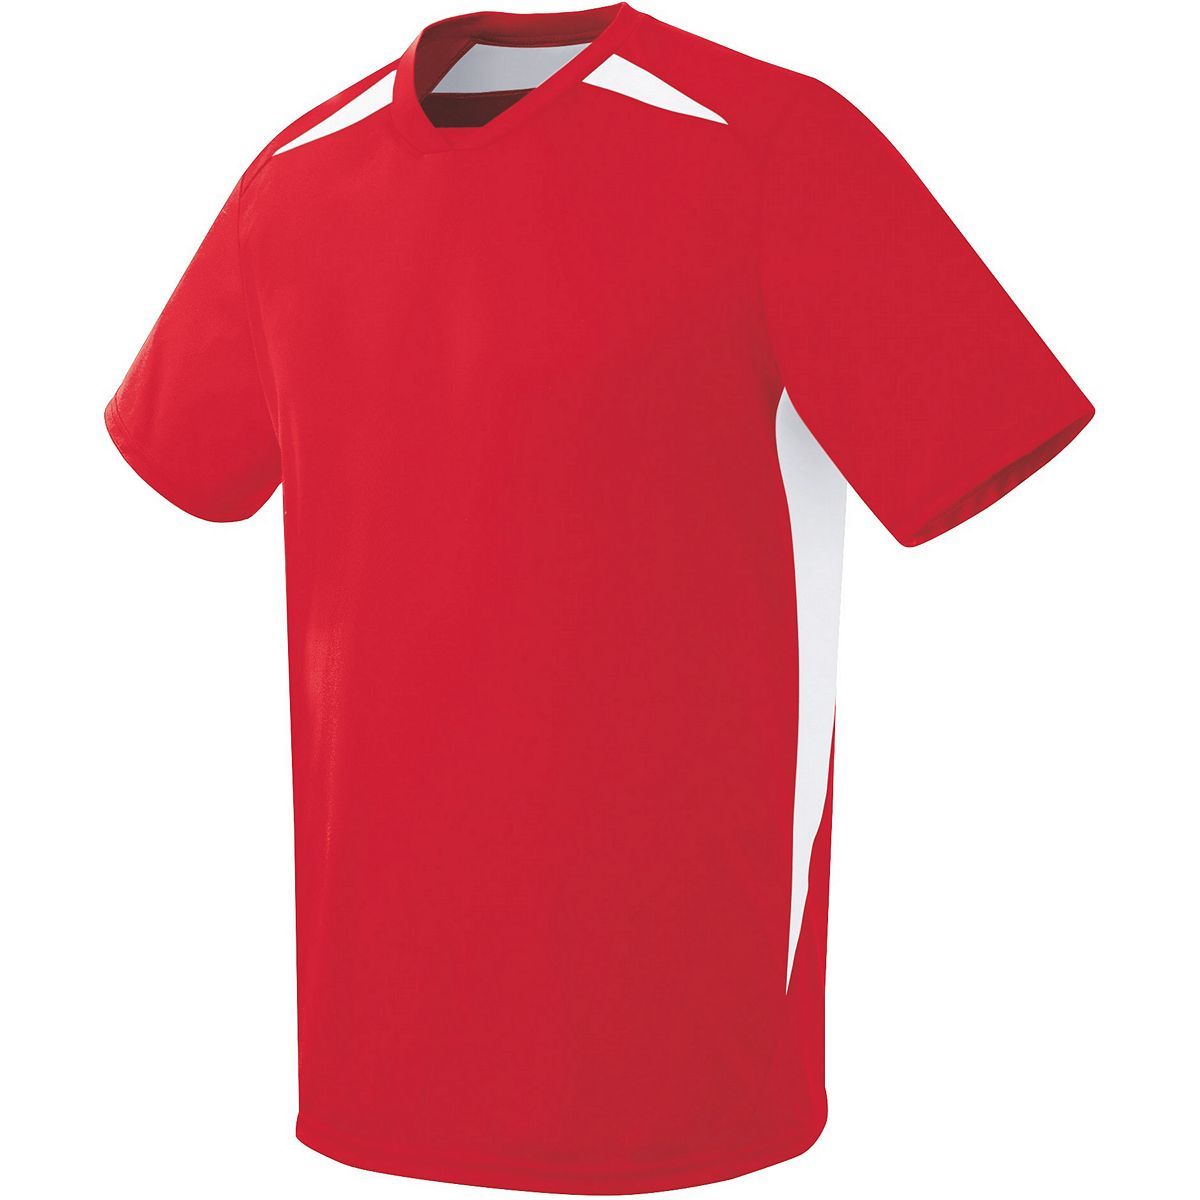 High 5 Youth Hawk Jersey in Scarlet/White  -Part of the Youth, Youth-Jersey, High5-Products, Soccer, Shirts, All-Sports-1 product lines at KanaleyCreations.com